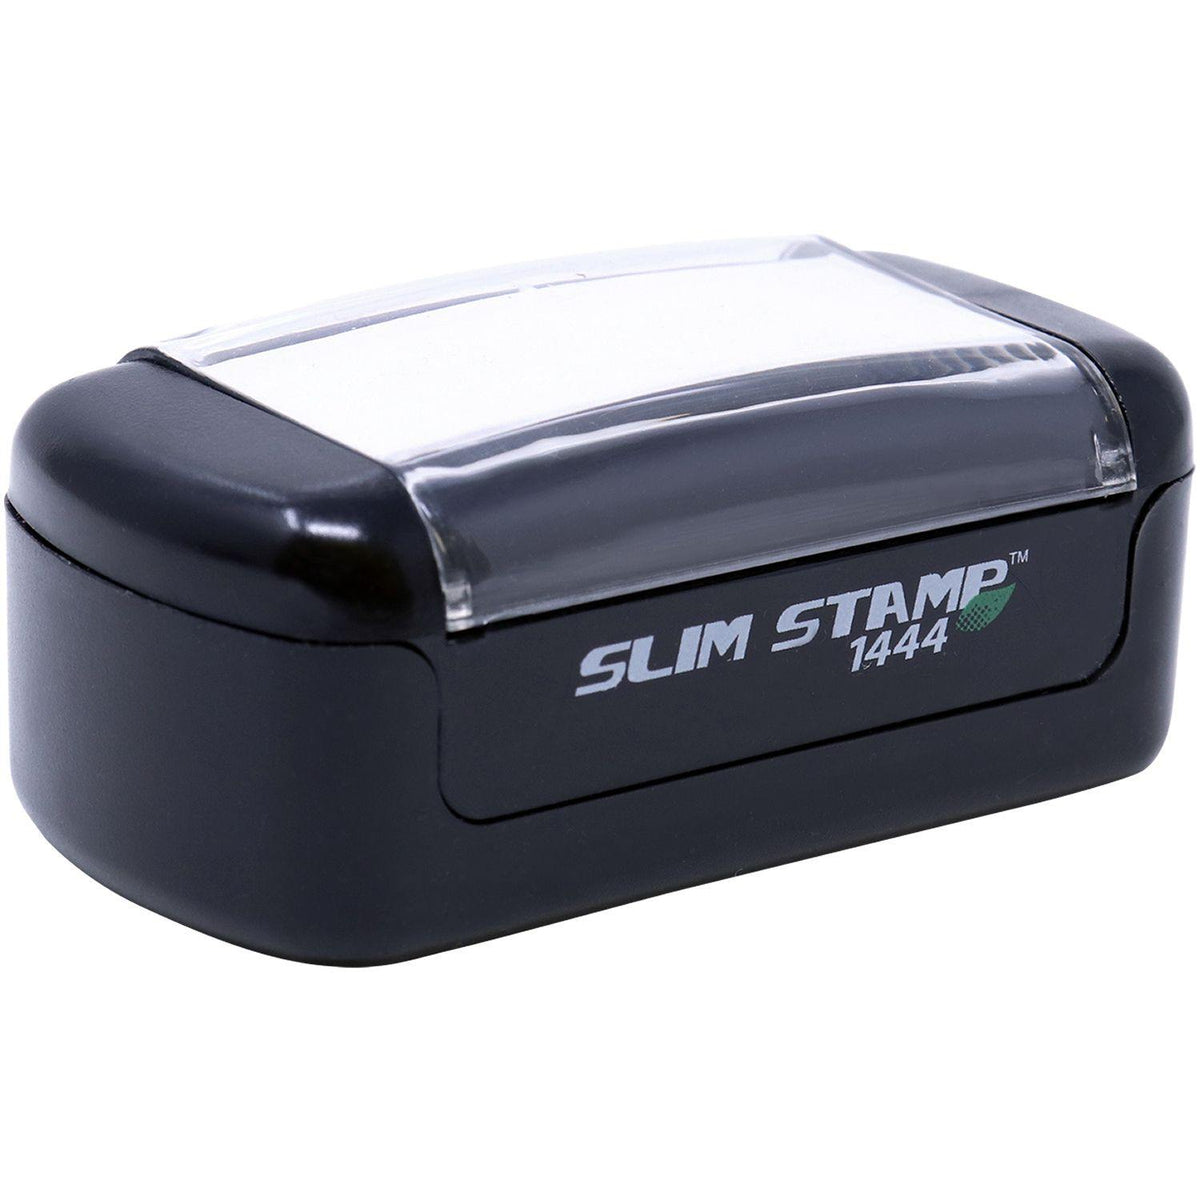 Alt View of Slim Pre Inked E Mail Stamp Mount Angle